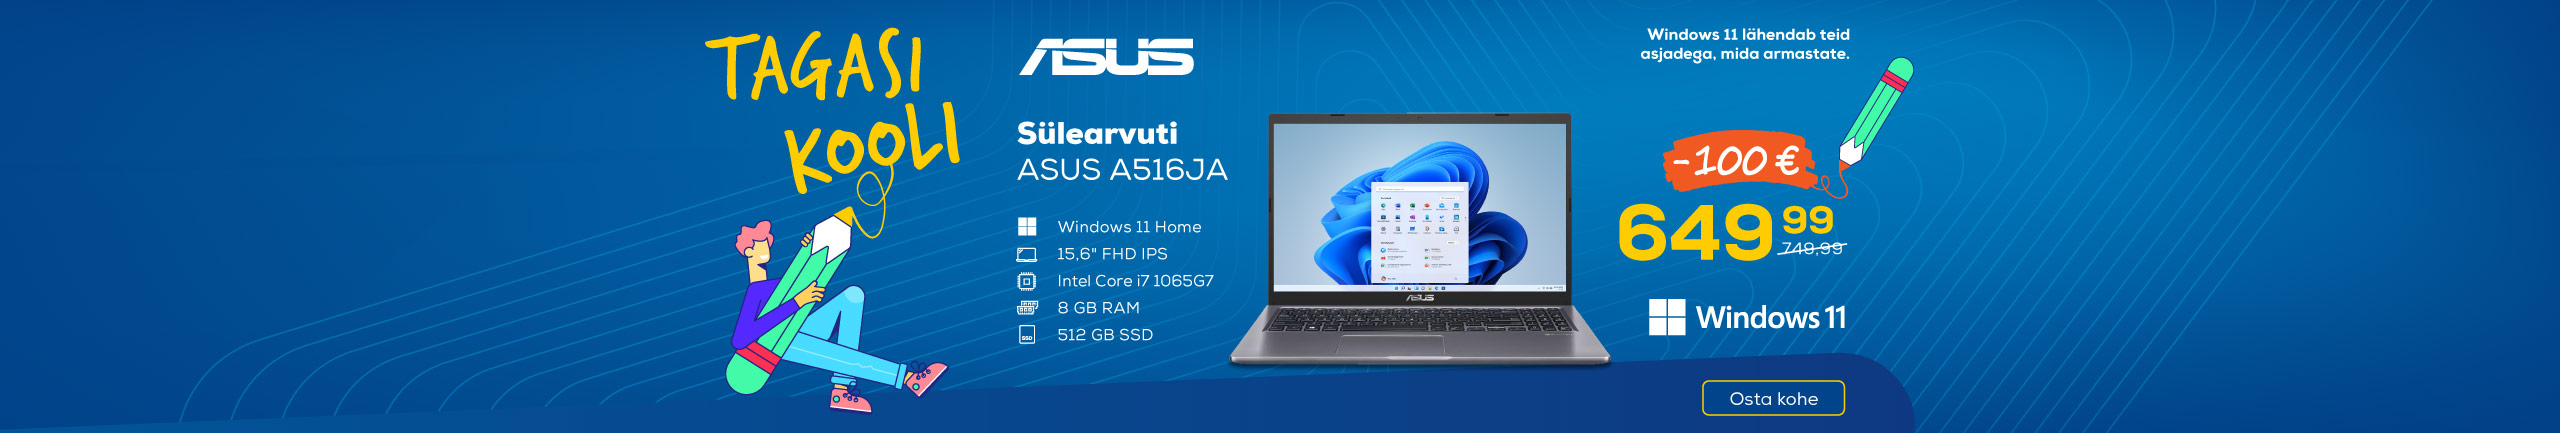 Back to school! Start Your new school year with a new ASUS laptop!